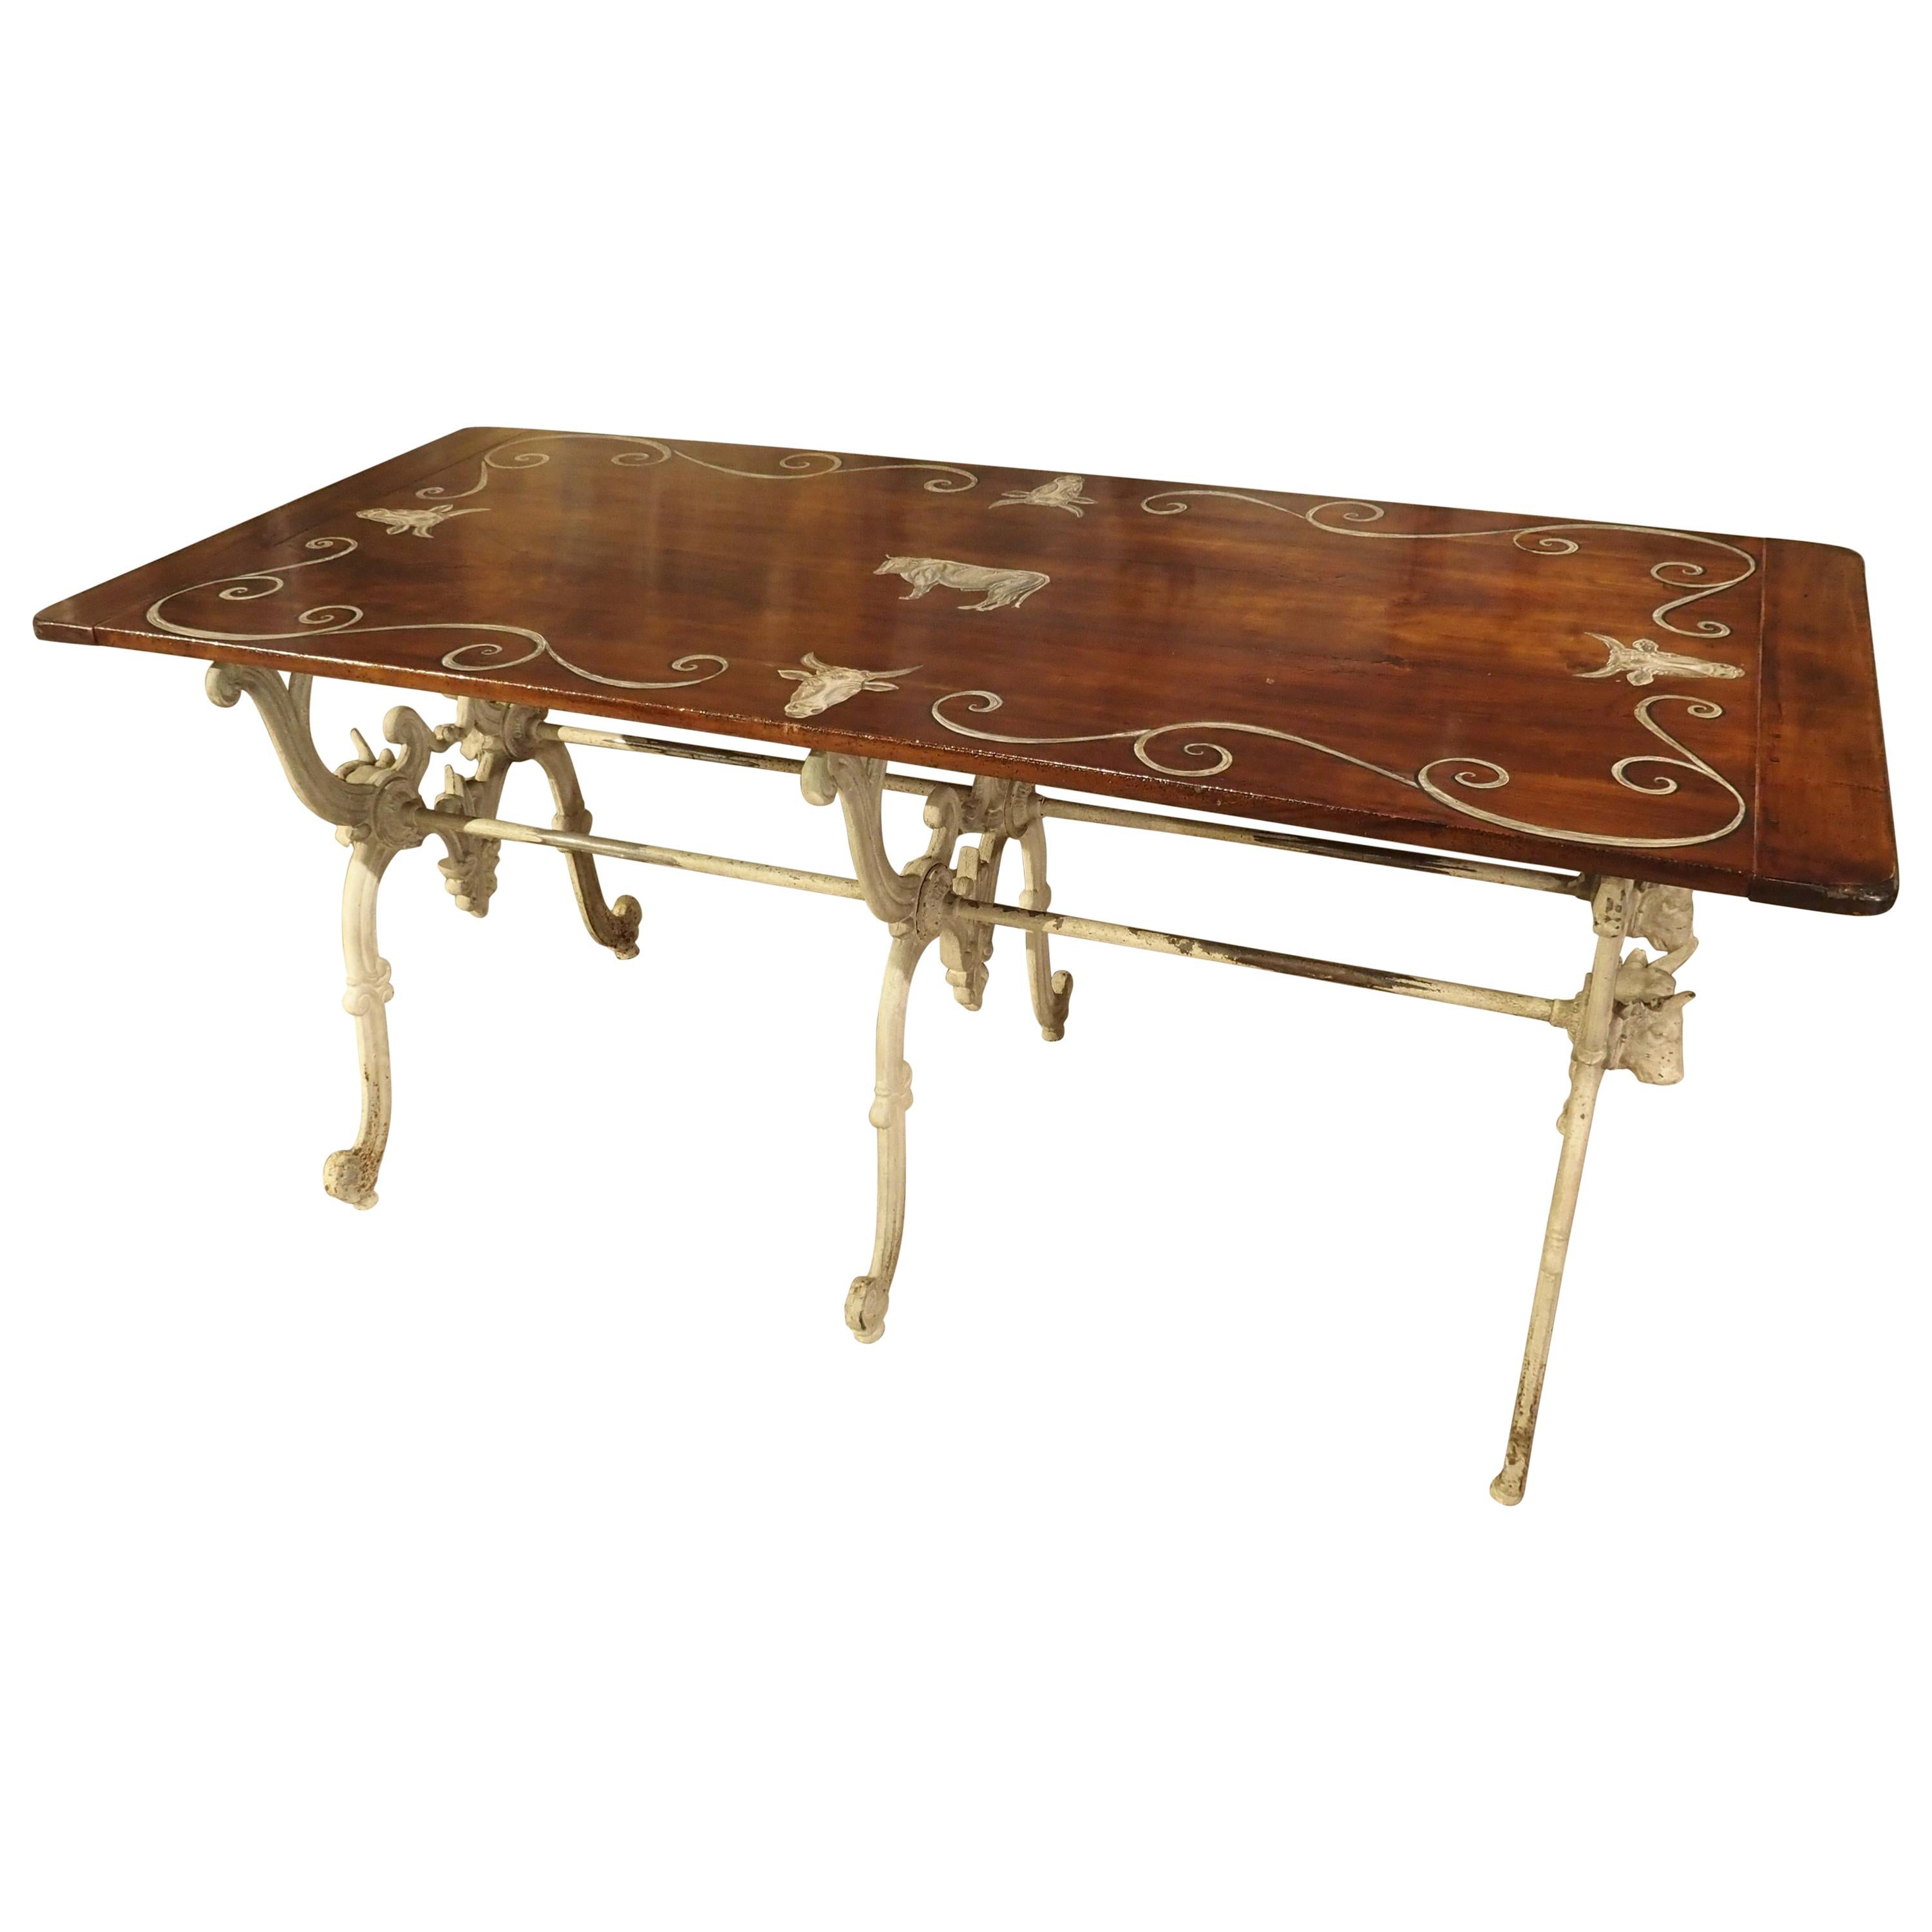 Antique French Wood and Iron Butchers Table, Late 19th Century